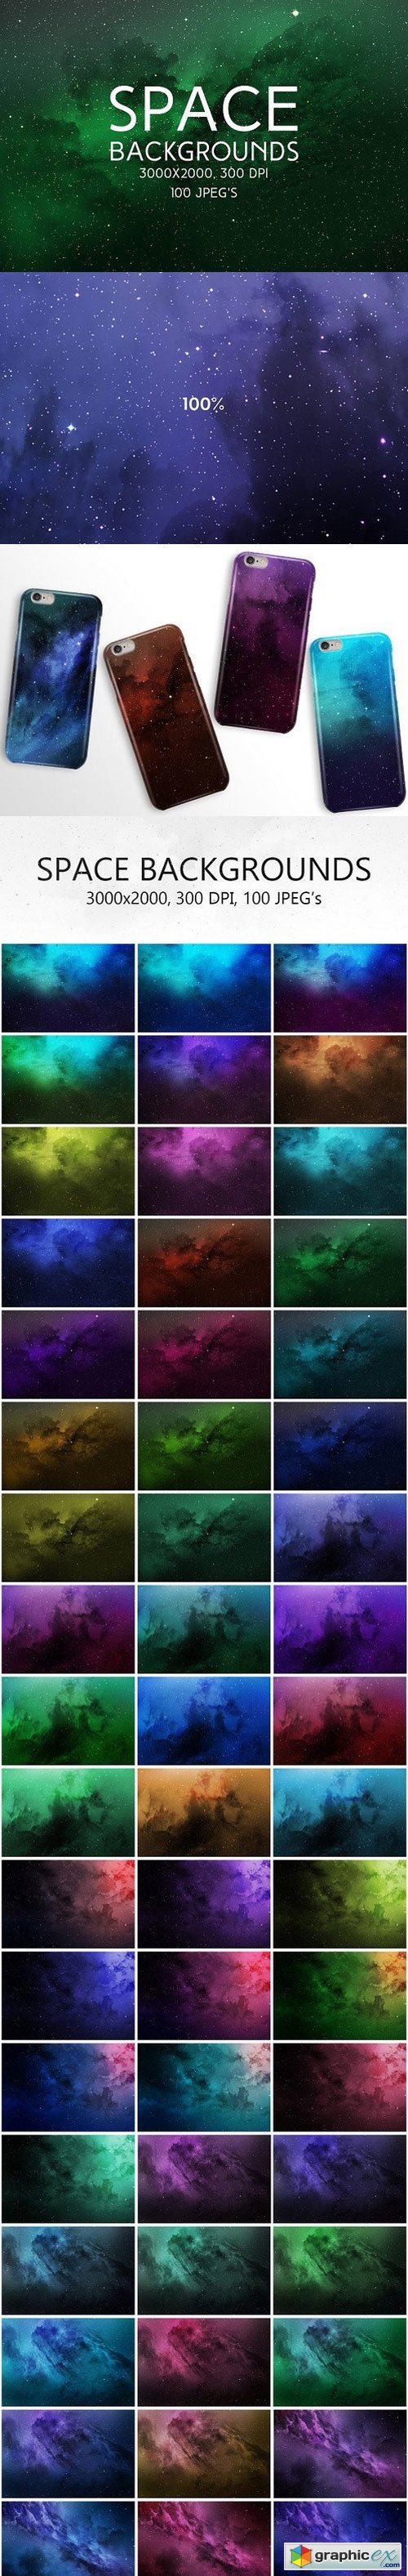 100 Space Backgrounds